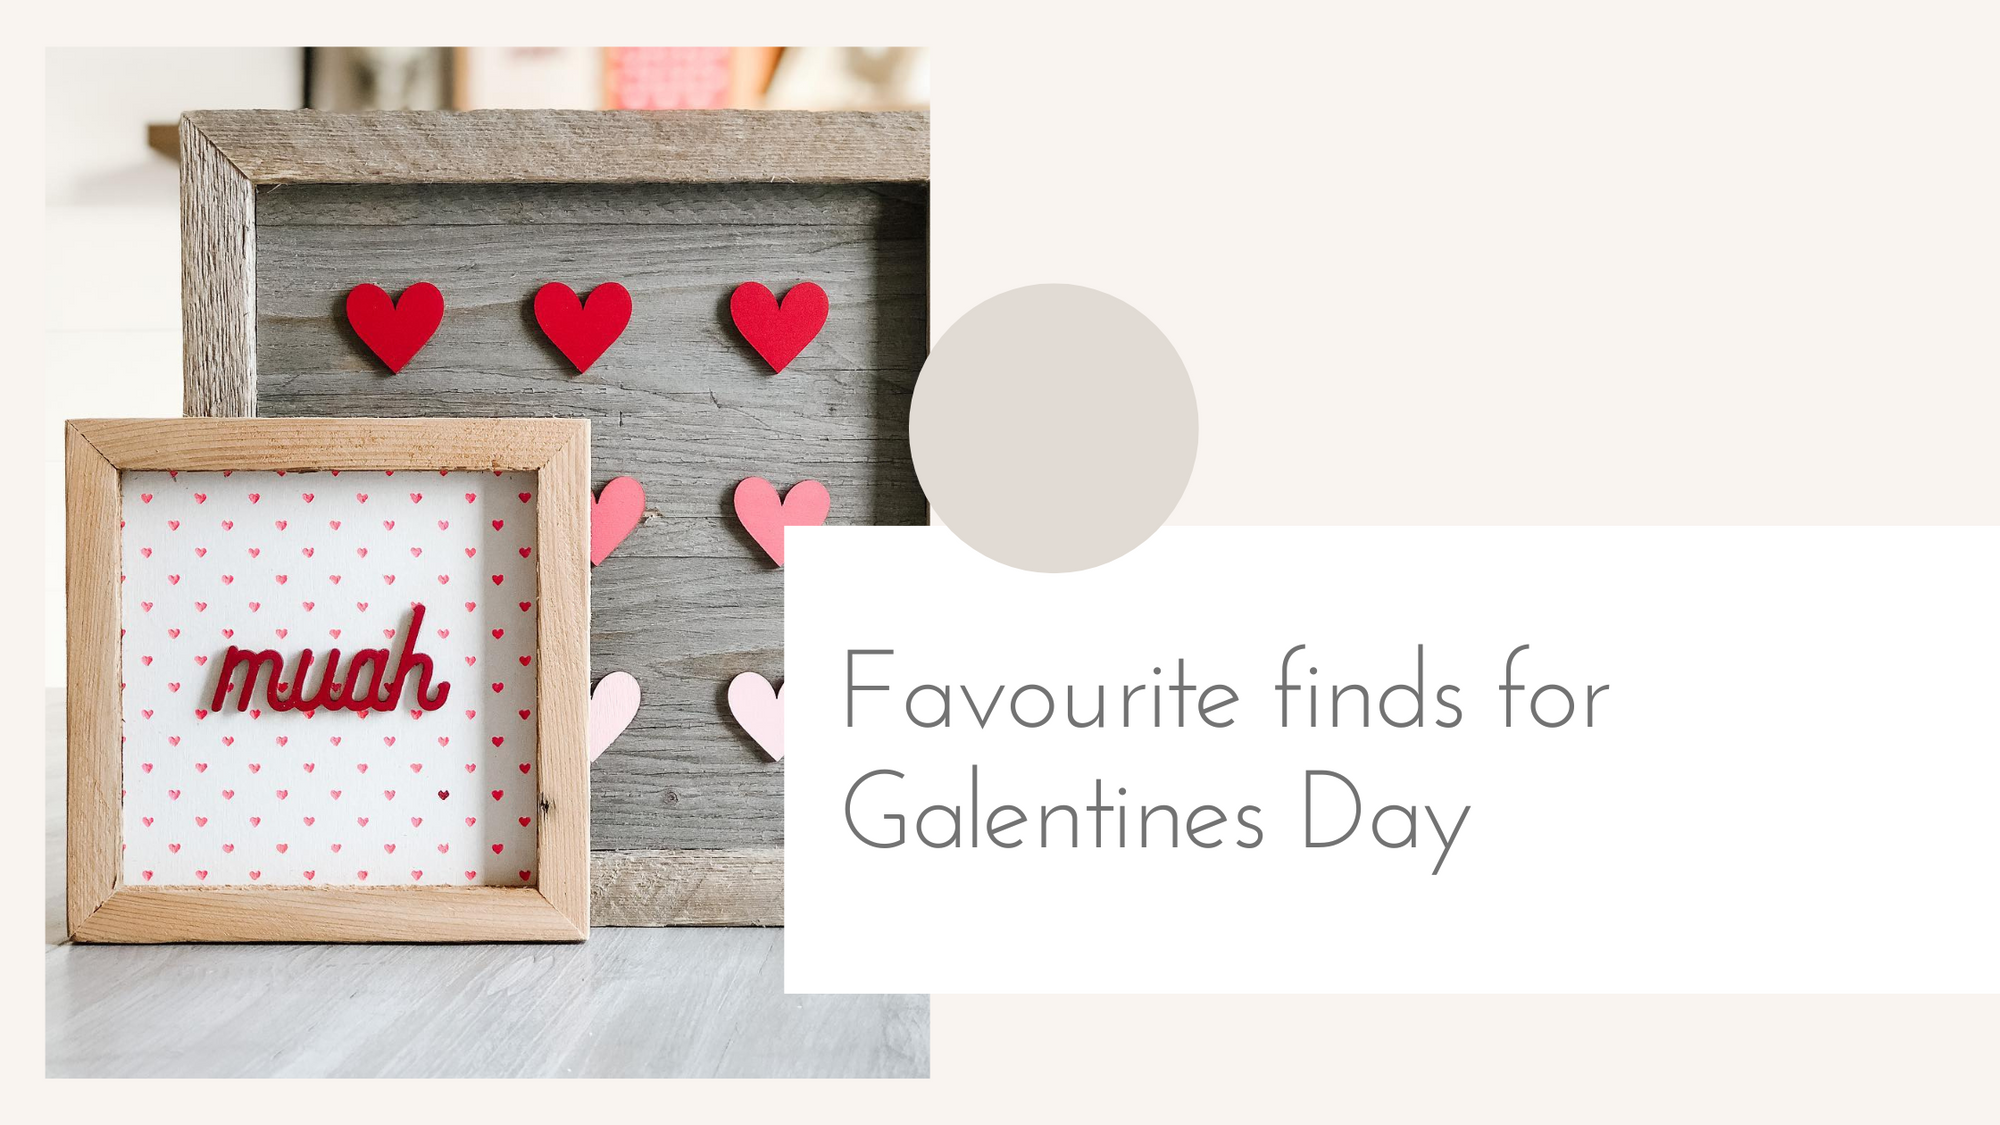 Favourite finds for Galentines Day